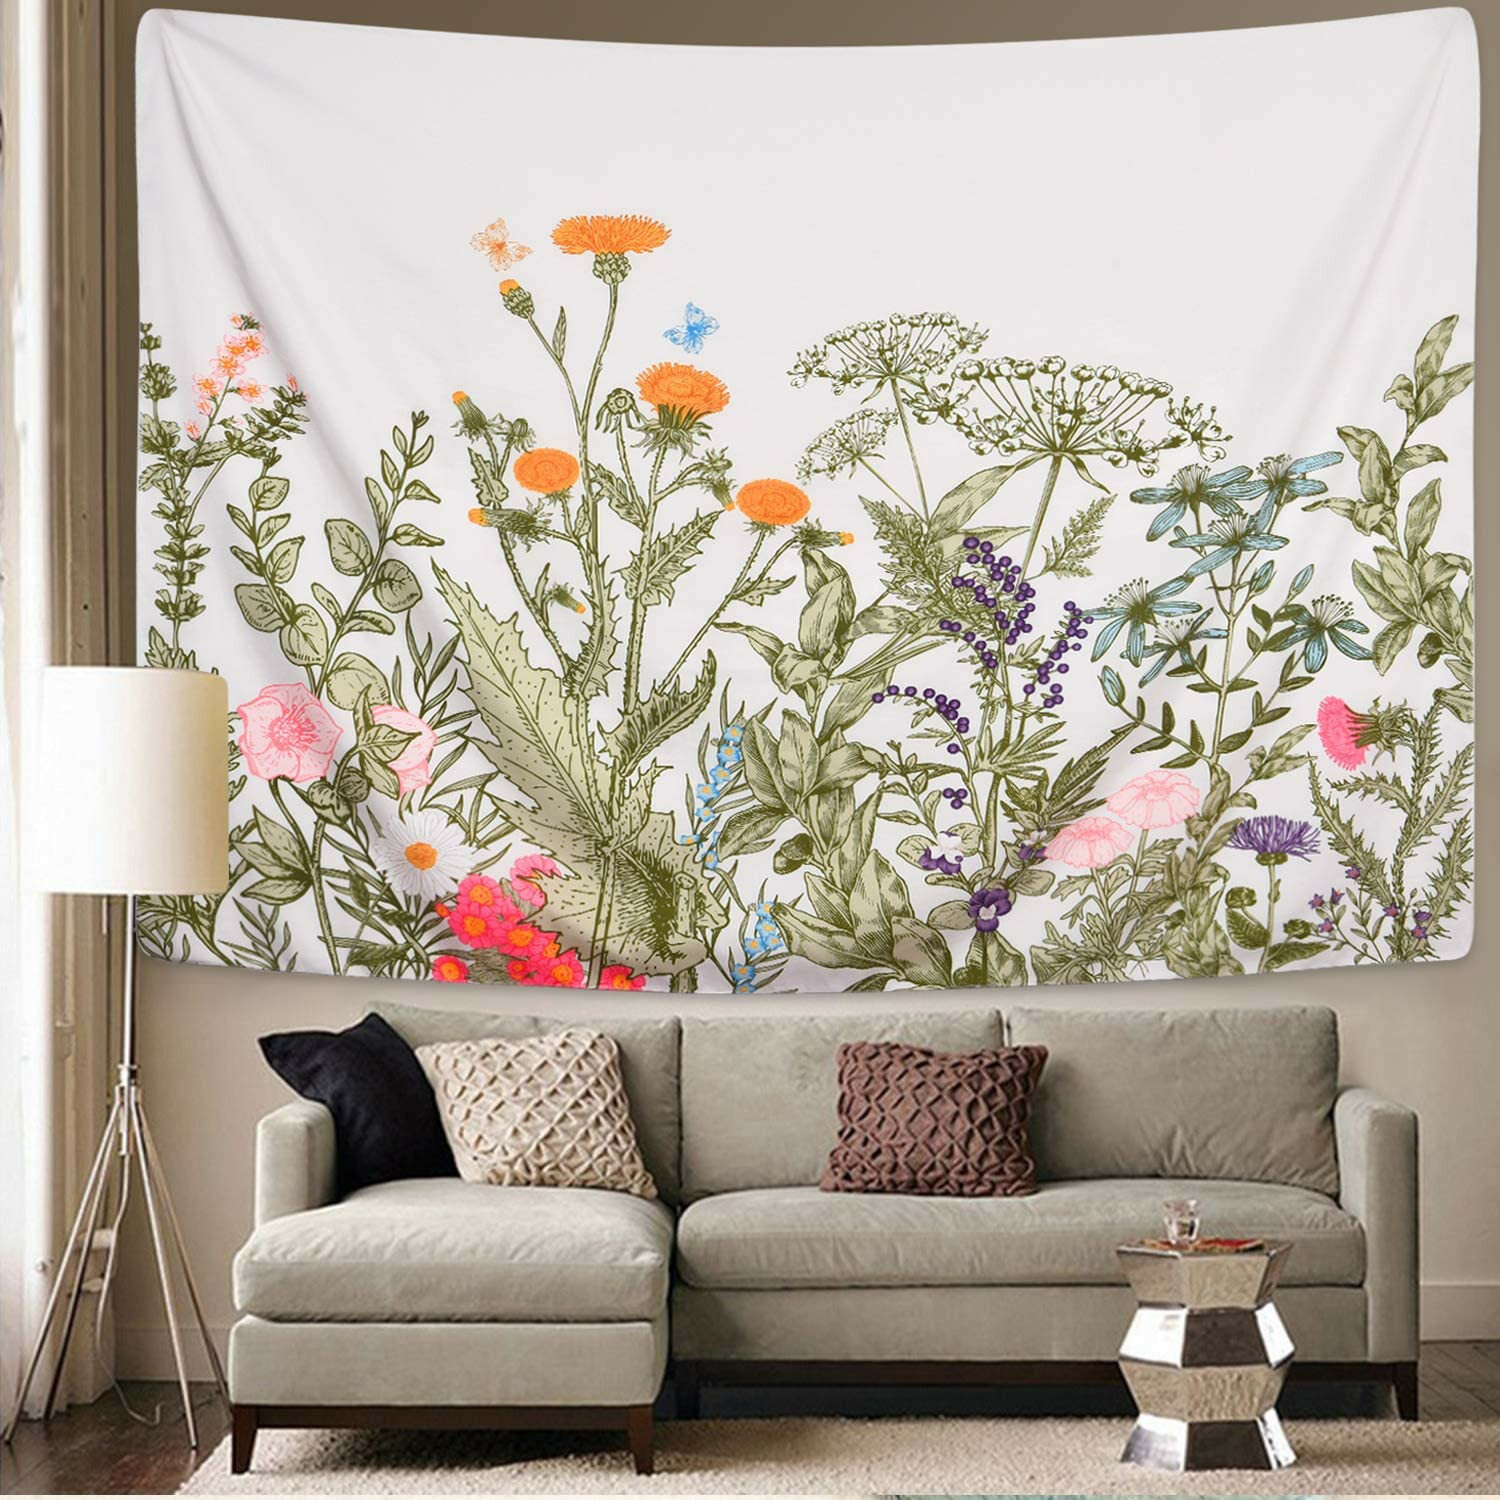 

Colorful Flower Plant Tapestry Retro Herbal Tapestry Wild Flower Tapestry Wall Hangings Nature Scenery Tapestry